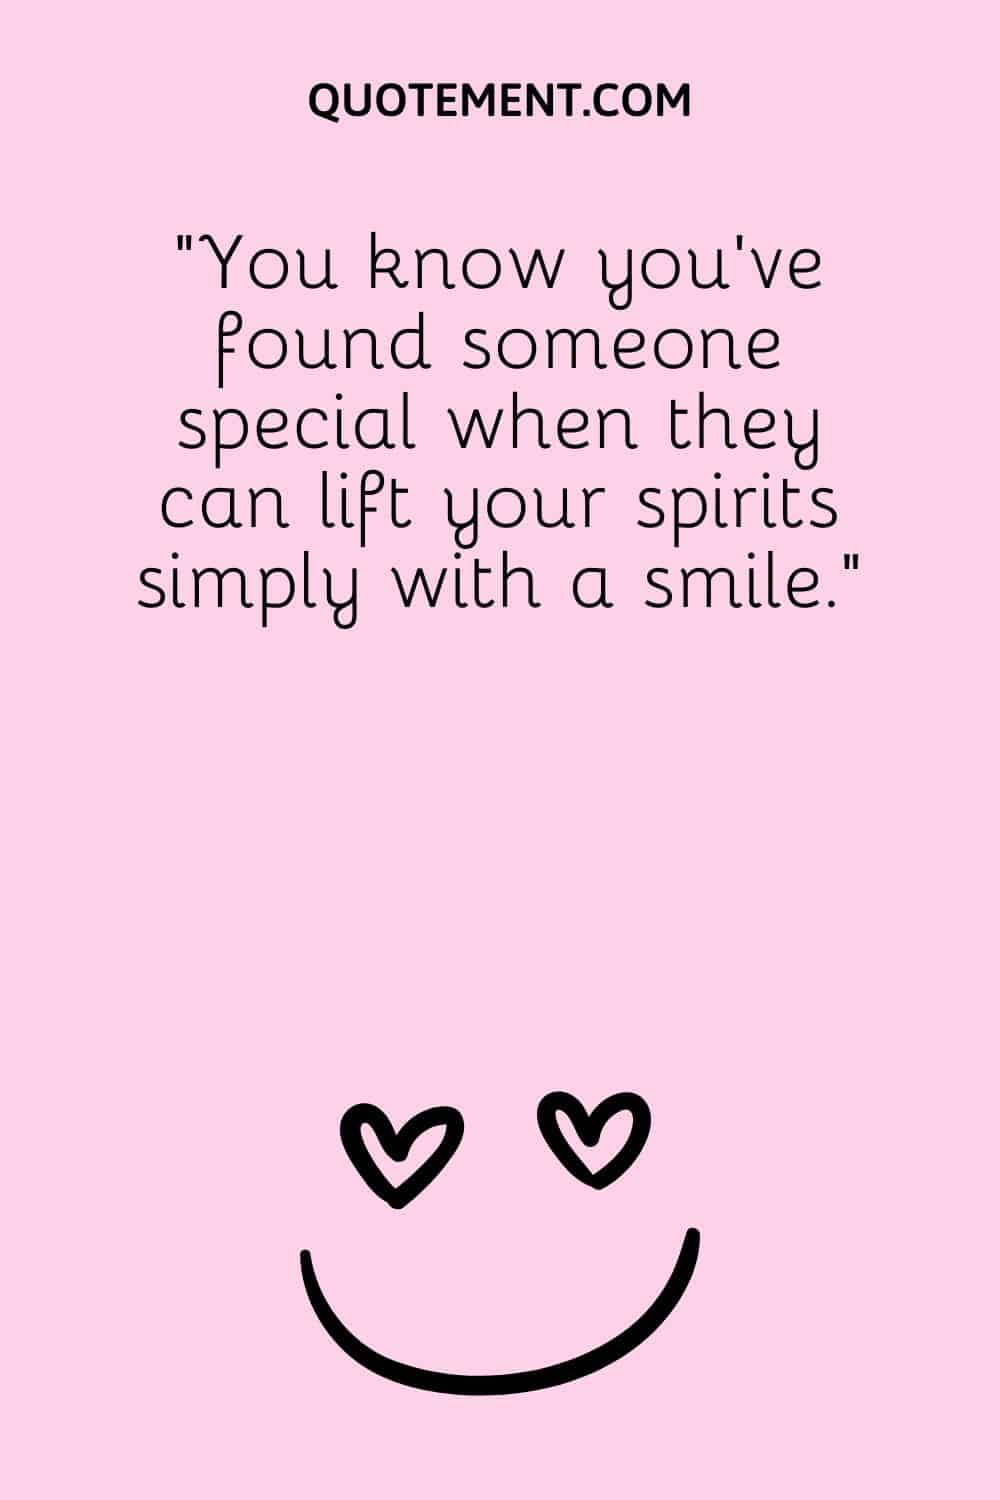 You know you’ve found someone special when they can lift your spirits simply with a smile